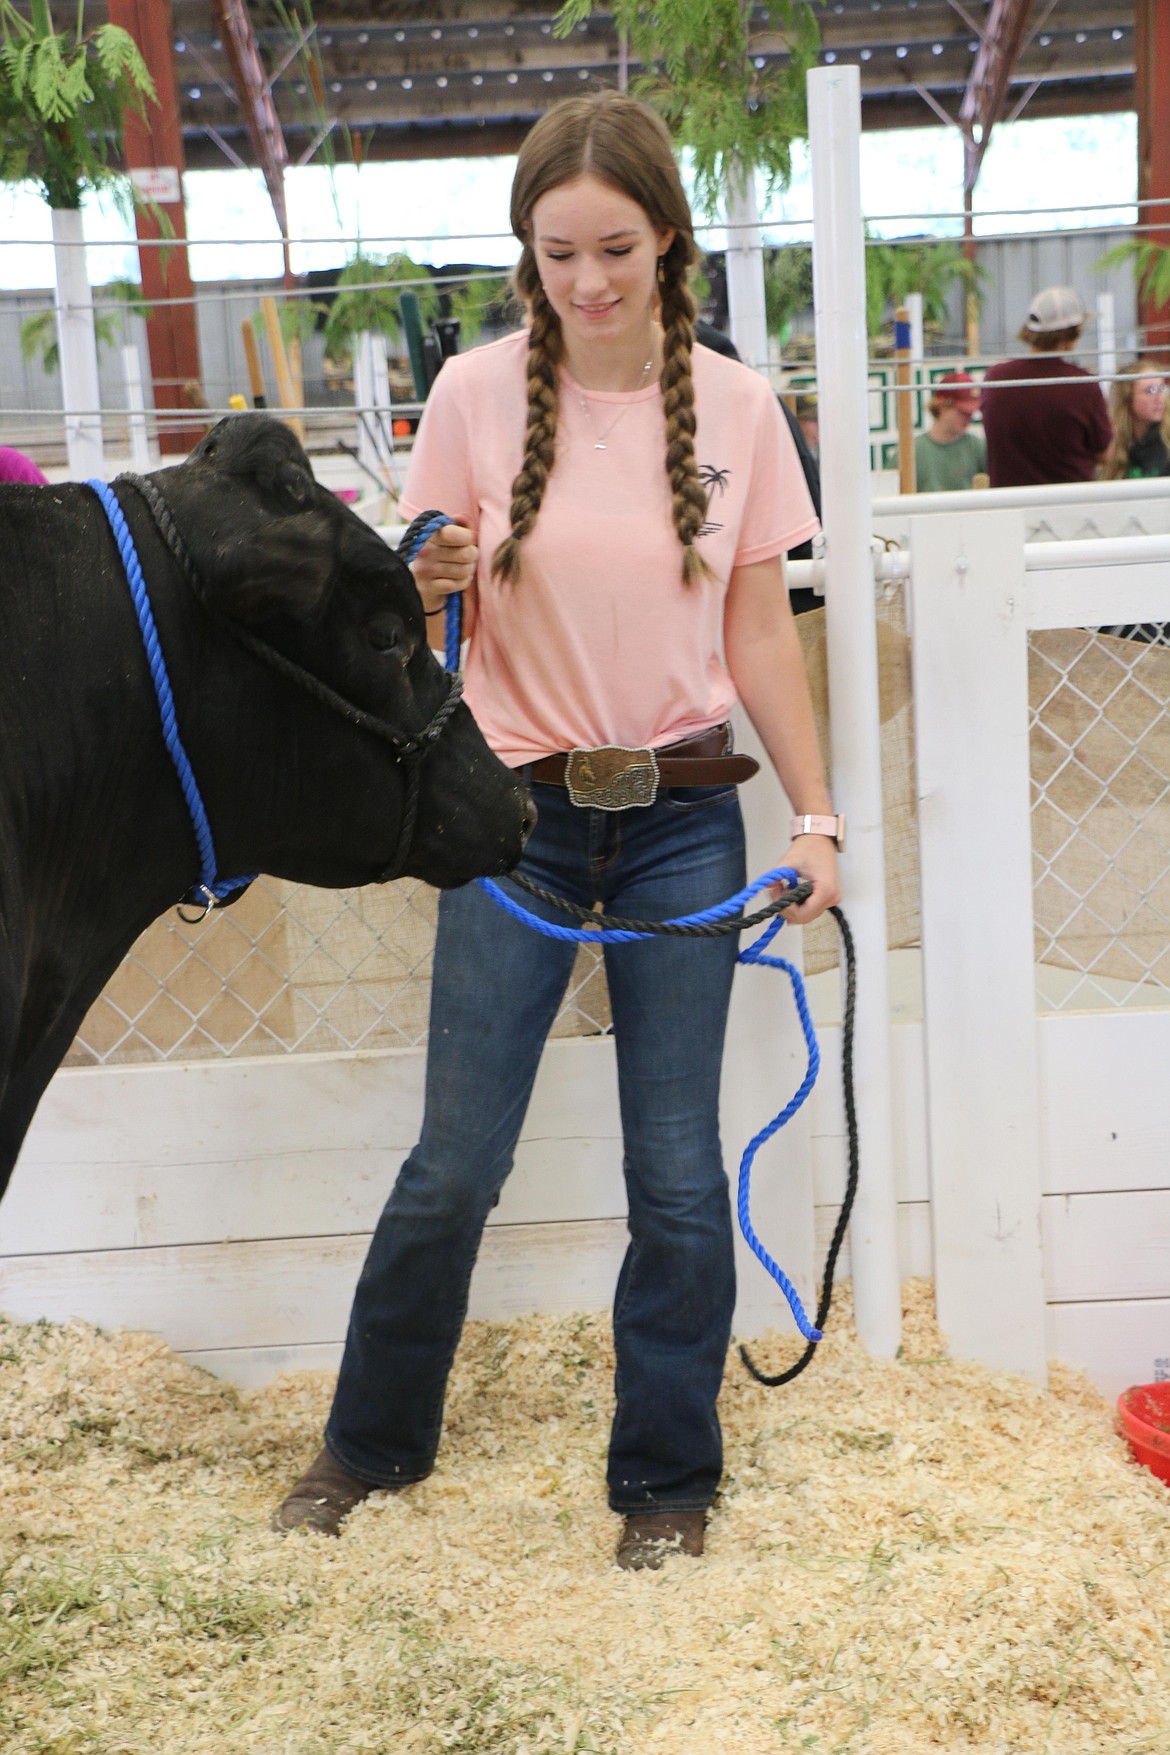 Kylie Evenson takes care of Riblet at the Bonner County Fair on Wednesday as she readies for action.